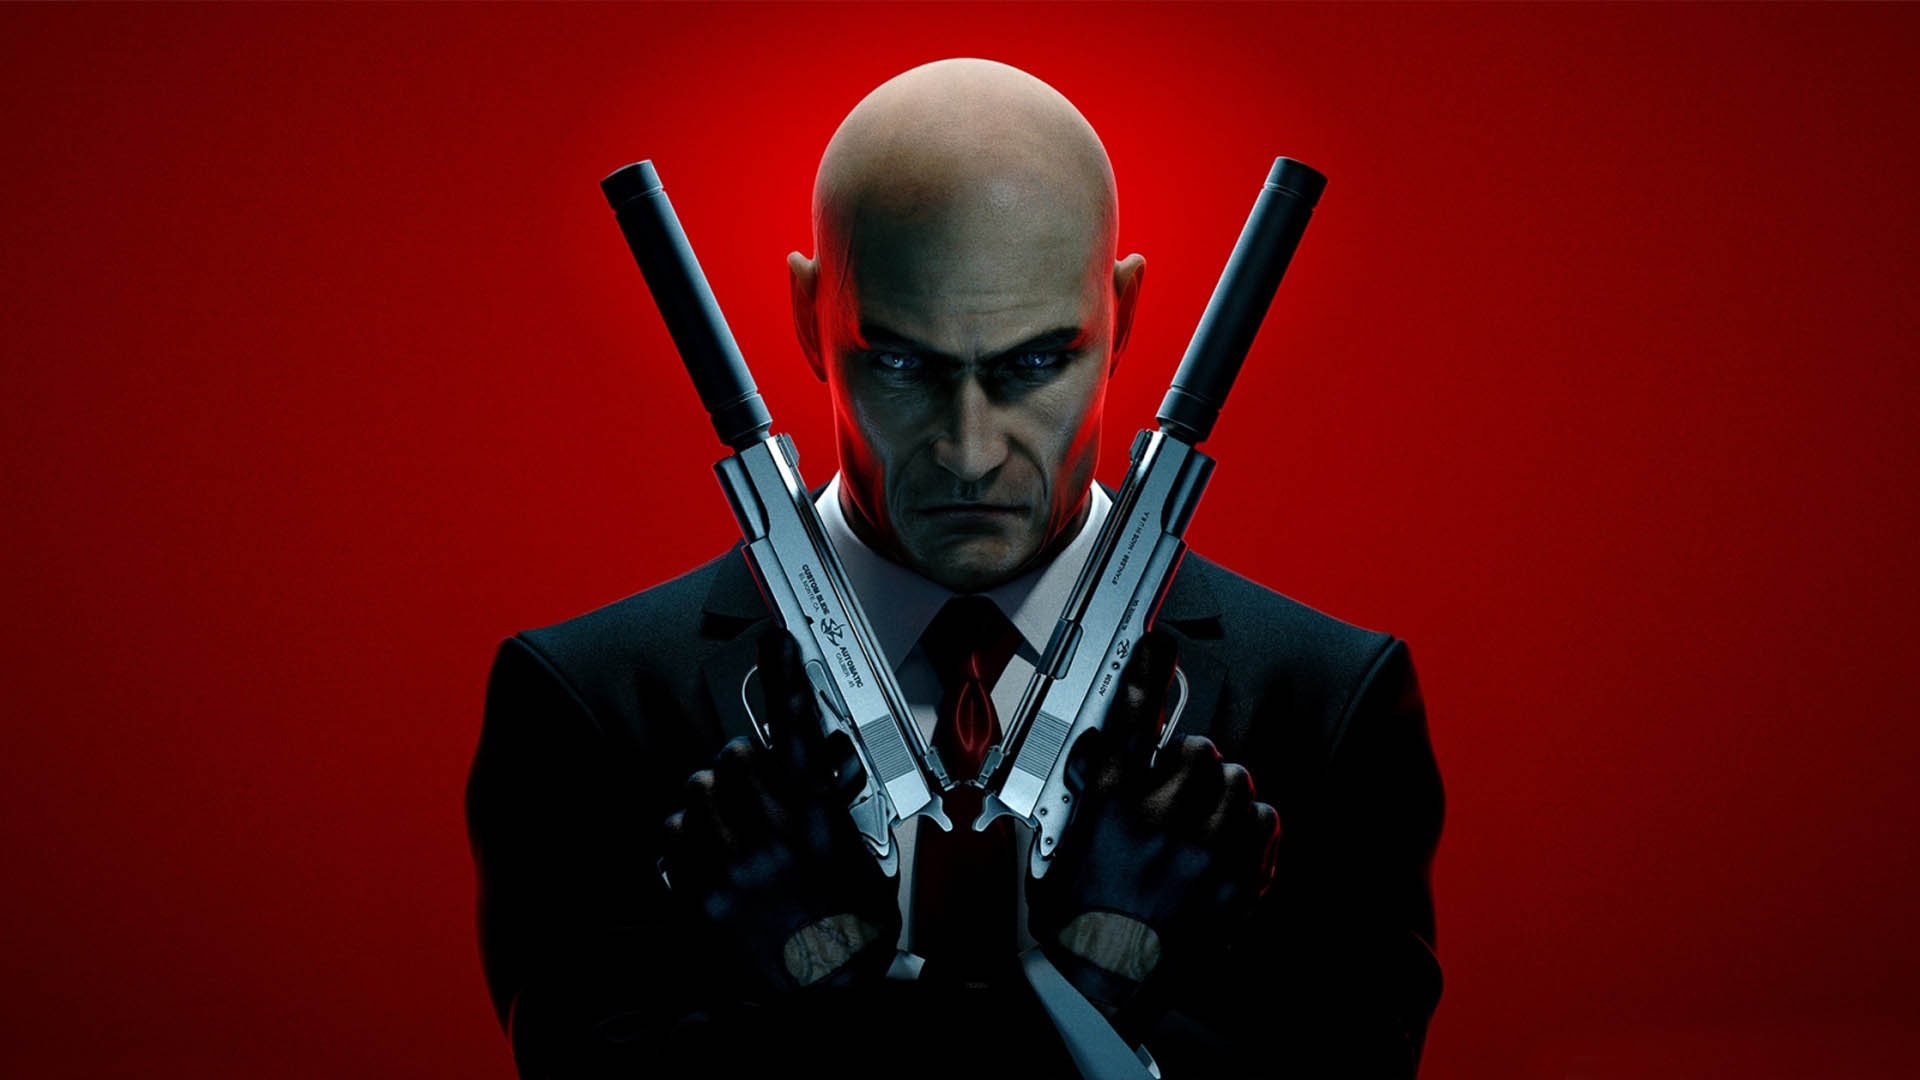 Hitman 3 system requirements